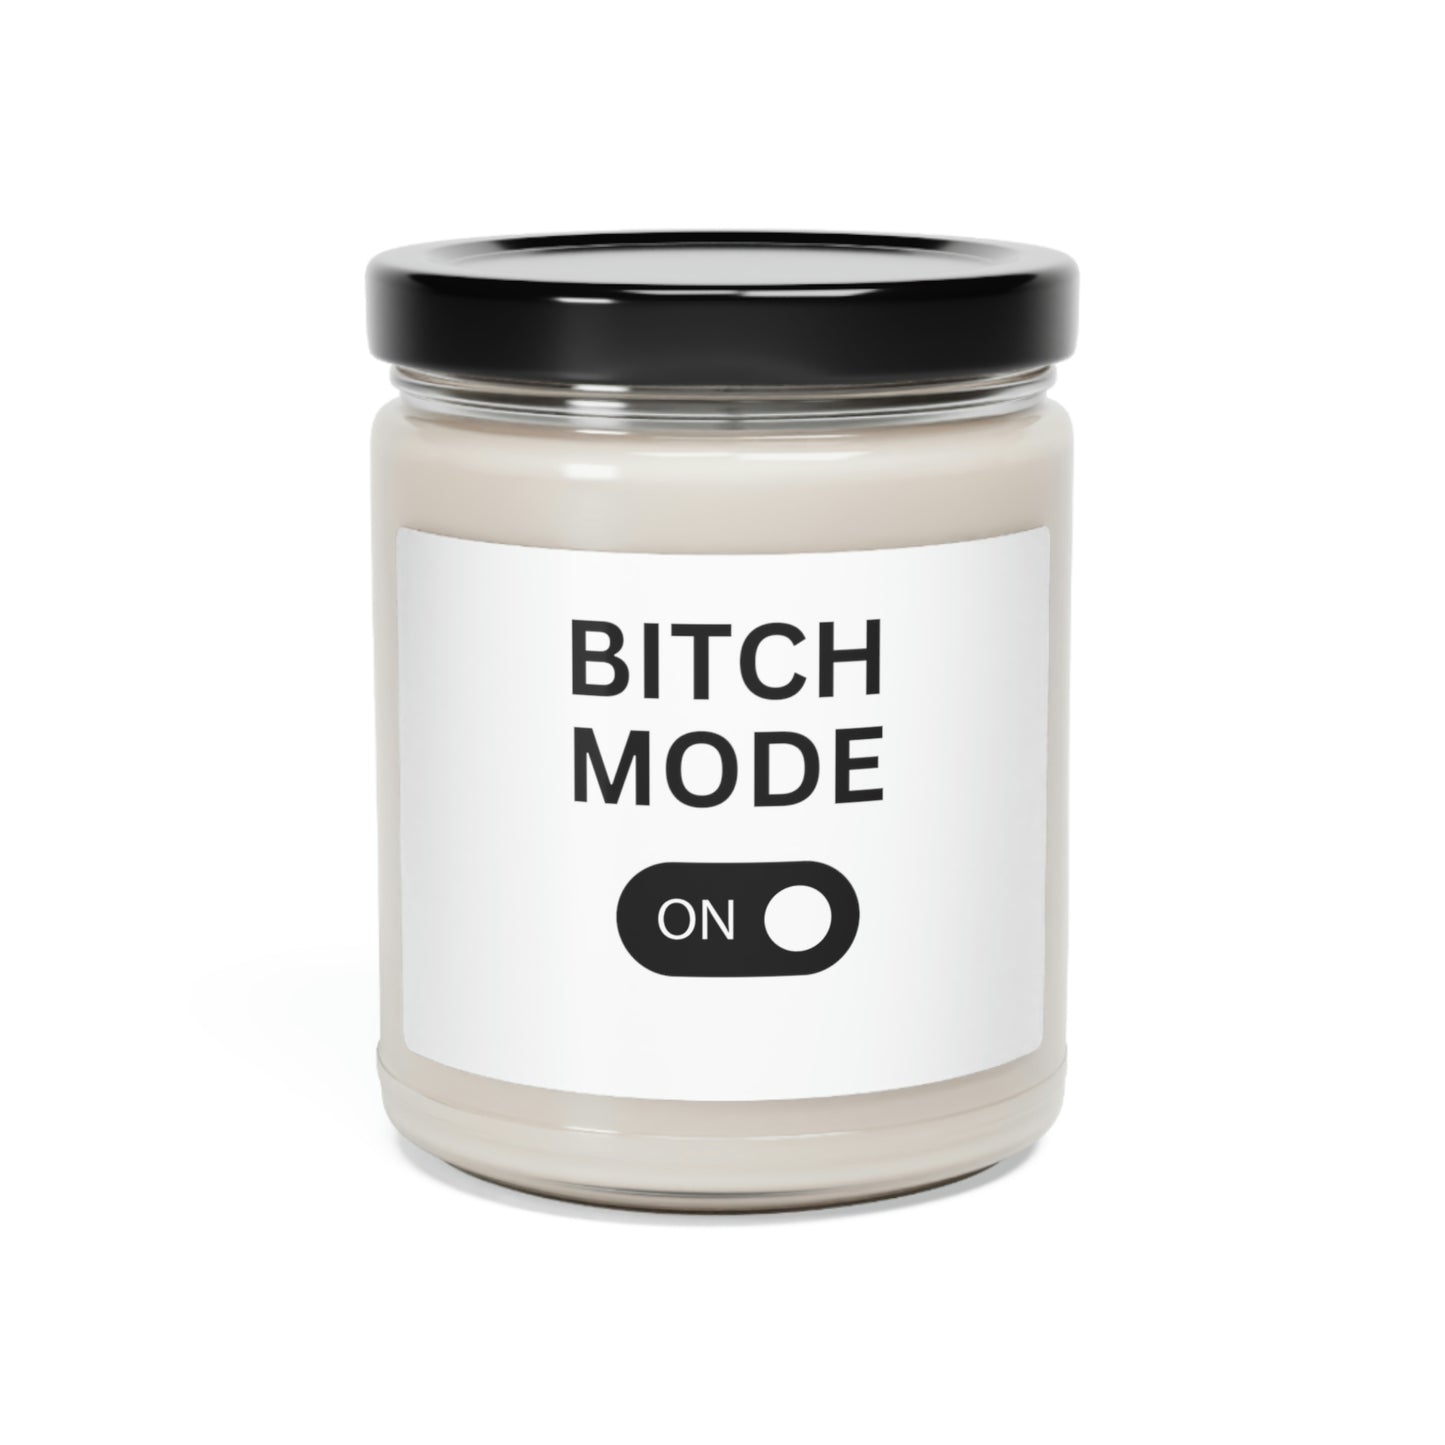 Bitch Mode On Custom Candle Scented Soy Candle | Funny Gift for Moms and Friends - Eb Creations Home Decor Bitch Mode On Custom Candle Scented Soy Candle | Funny Gift for Moms and Friends